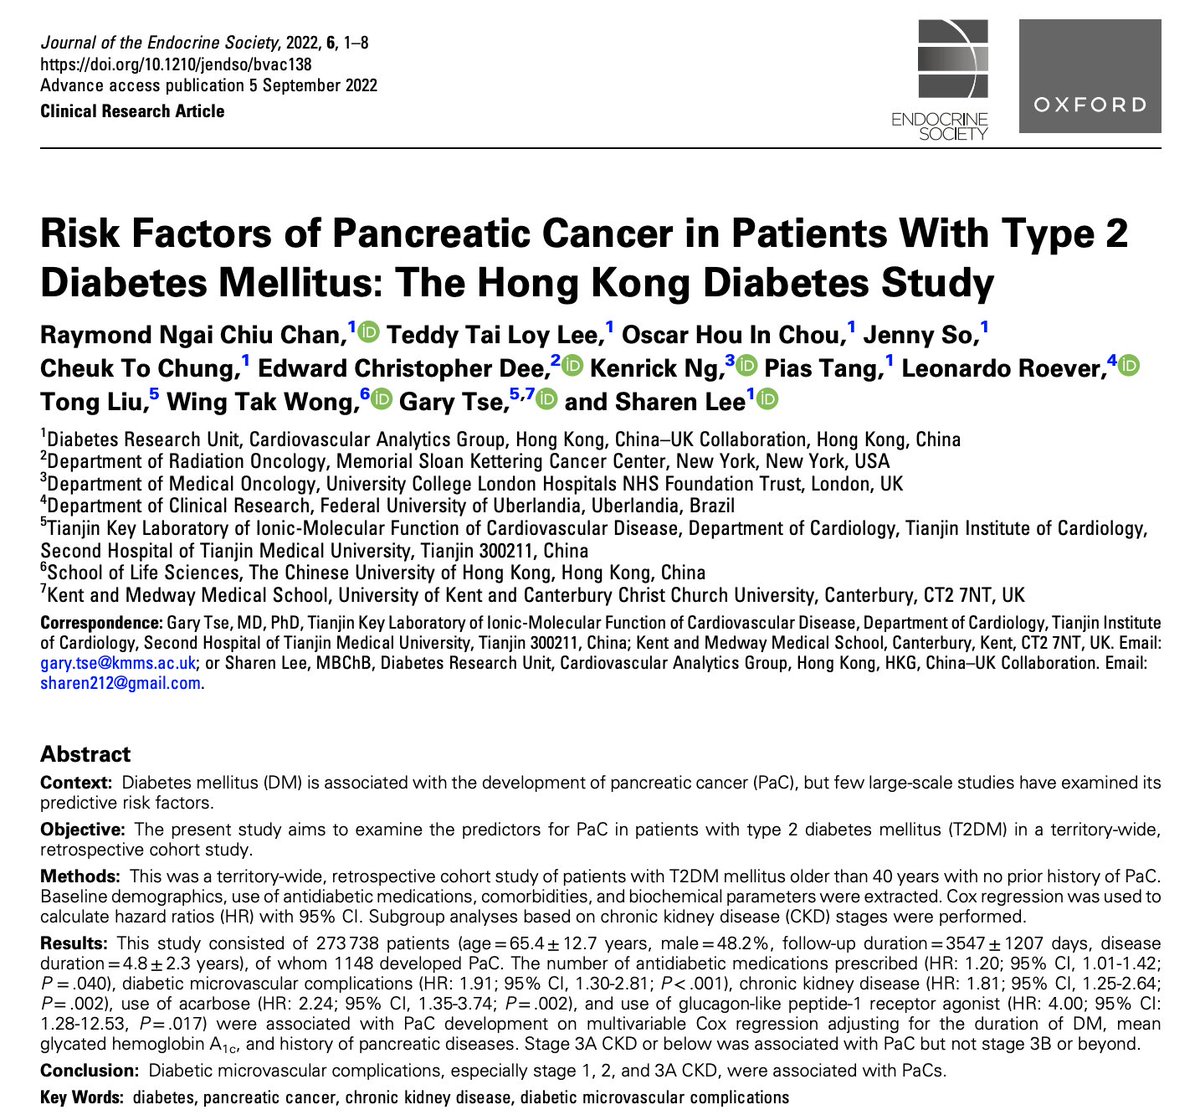 📝 In @EndoSocJournals, led by Raymond Chan @CVAnalytics2015, we report work from the #HongKong Diabetes Study assessing predictors of #pancreas #cancer among #patients with #diabetes 🇭🇰 🙏 @Sharen212 @GaryTse1 @Kenrickng1 @HealthcareAI_UK pubmed.ncbi.nlm.nih.gov/36267596/